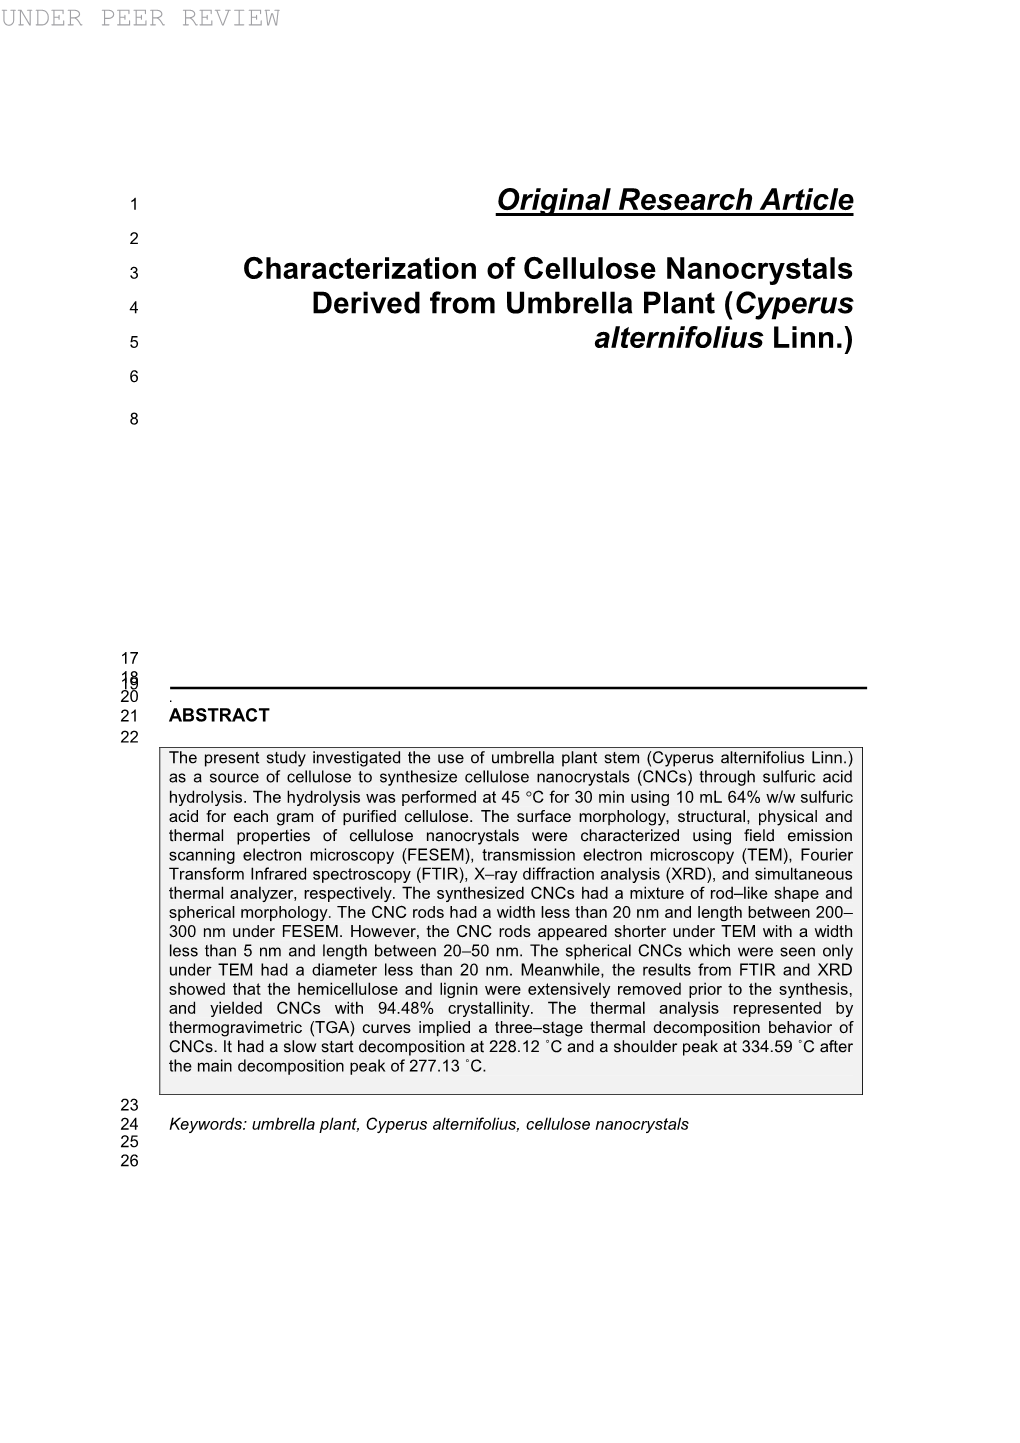 Original Research Article Characterization of Cellulose Nanocrystals